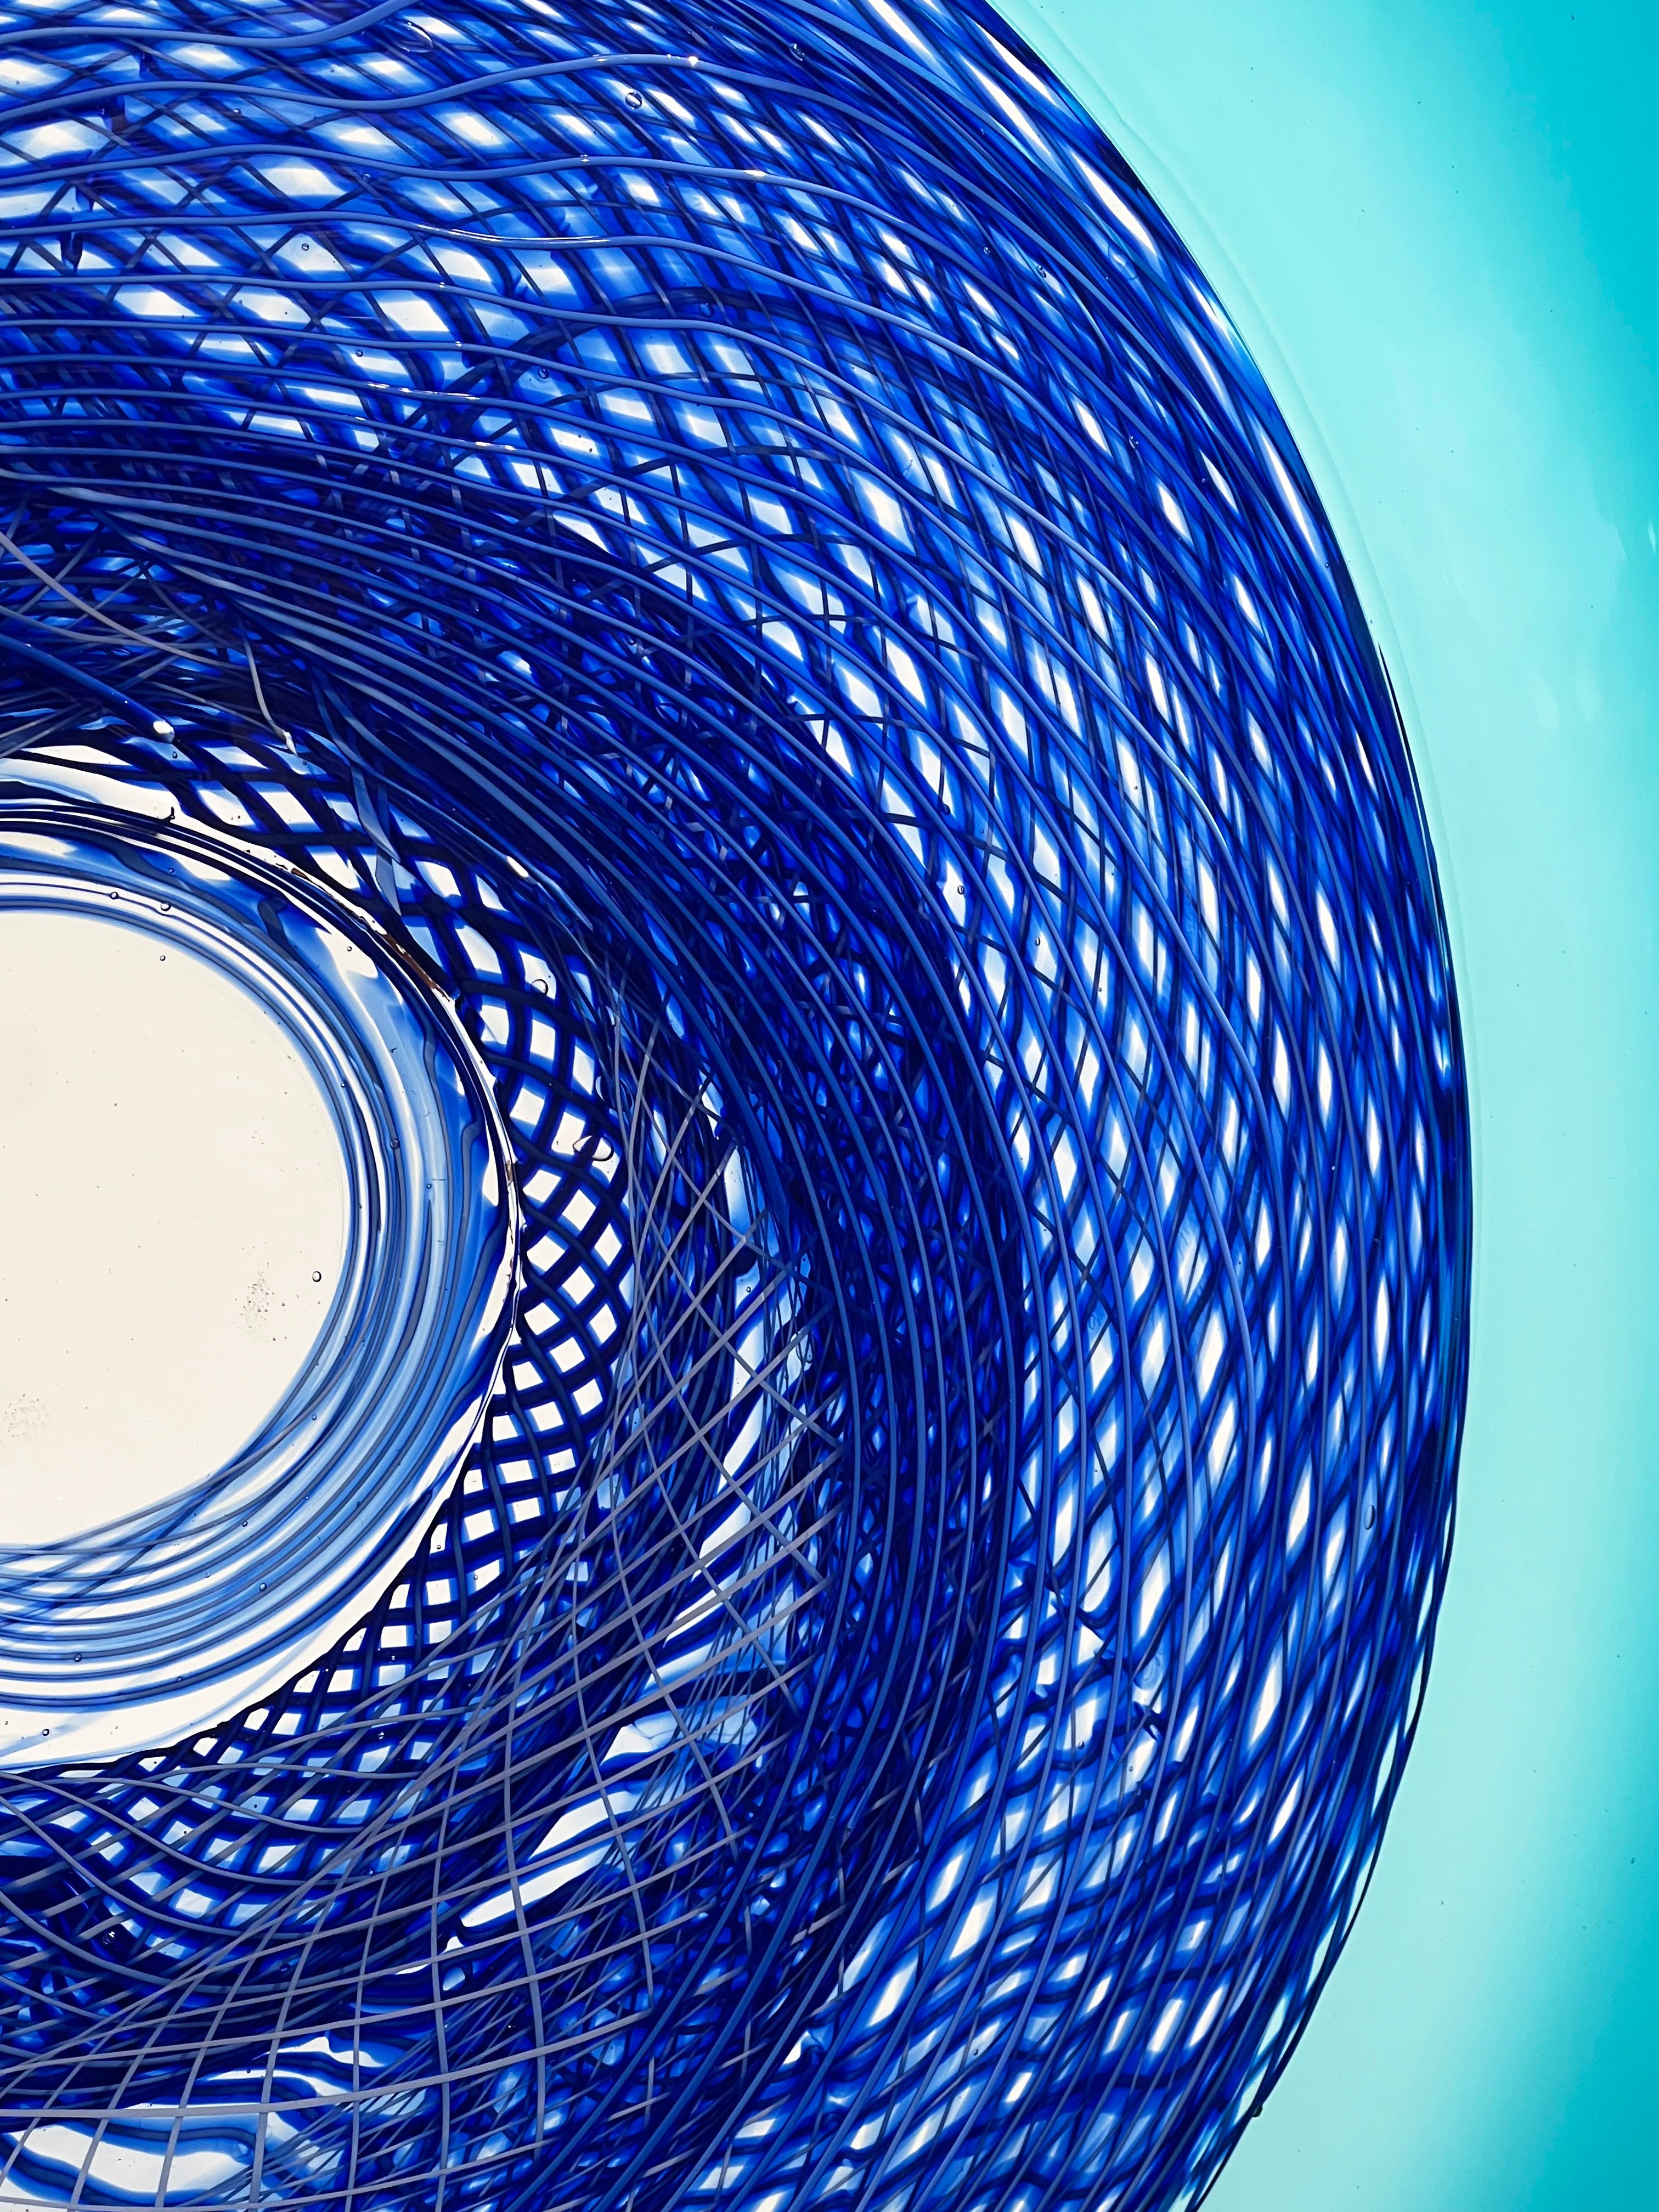 Blue Rondelle is a large scale glass and metal sculpture. The glass is a beautiful light blue that is met towards the middle with spiraling lines of vibrant cobalt glass cane.

David Thai is a Chinese Canadian Glass Artist who emigrated from Vietnam